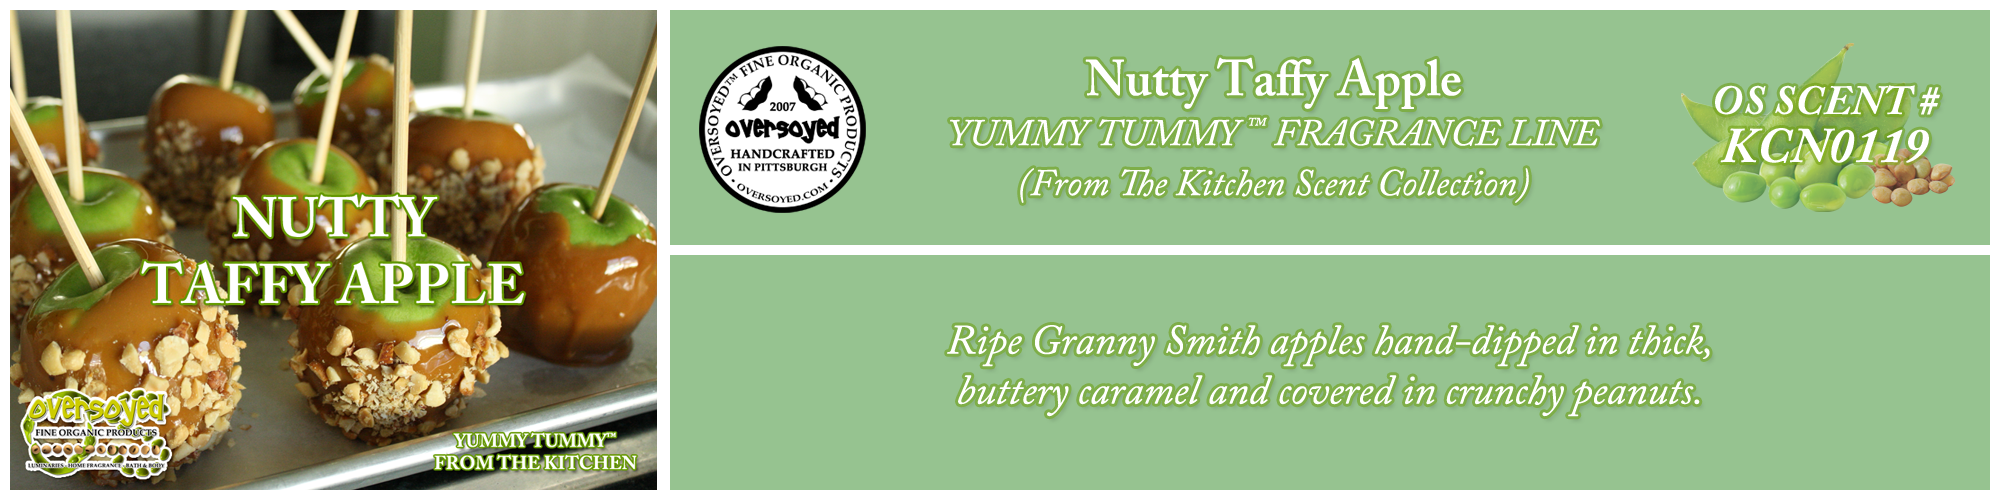 Nutty Taffy Apple Handcrafted Products Collection